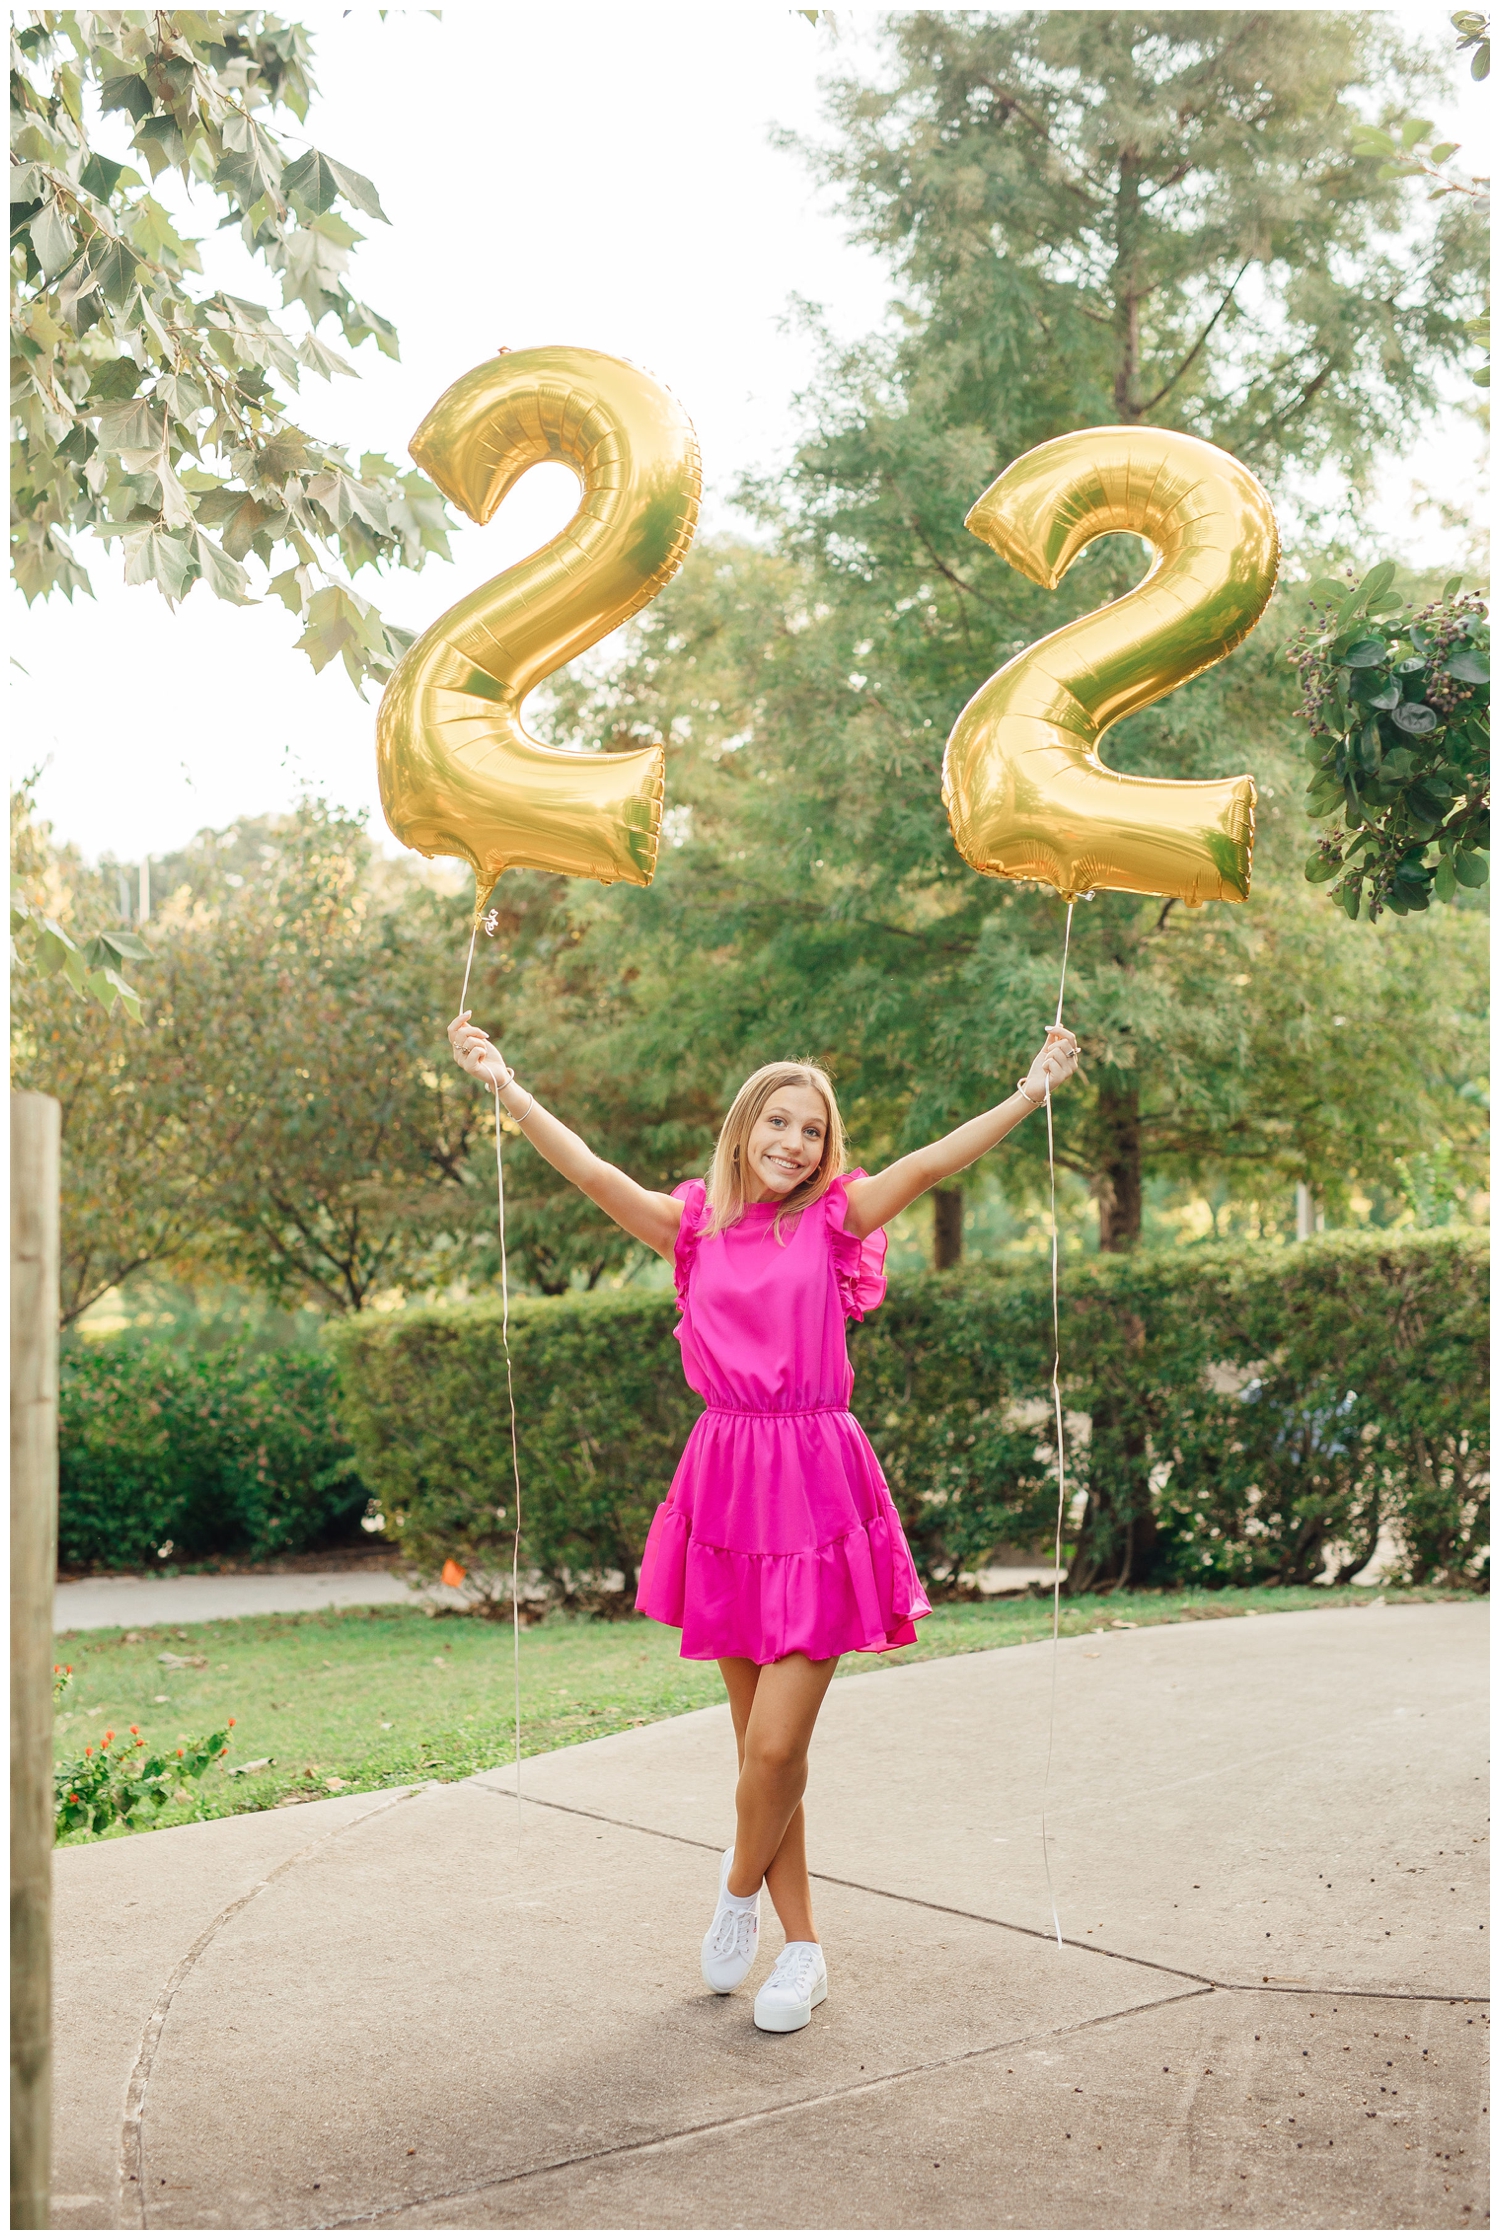 Houston senior pictures with balloons standing on sidewalk holding up 22 balloon